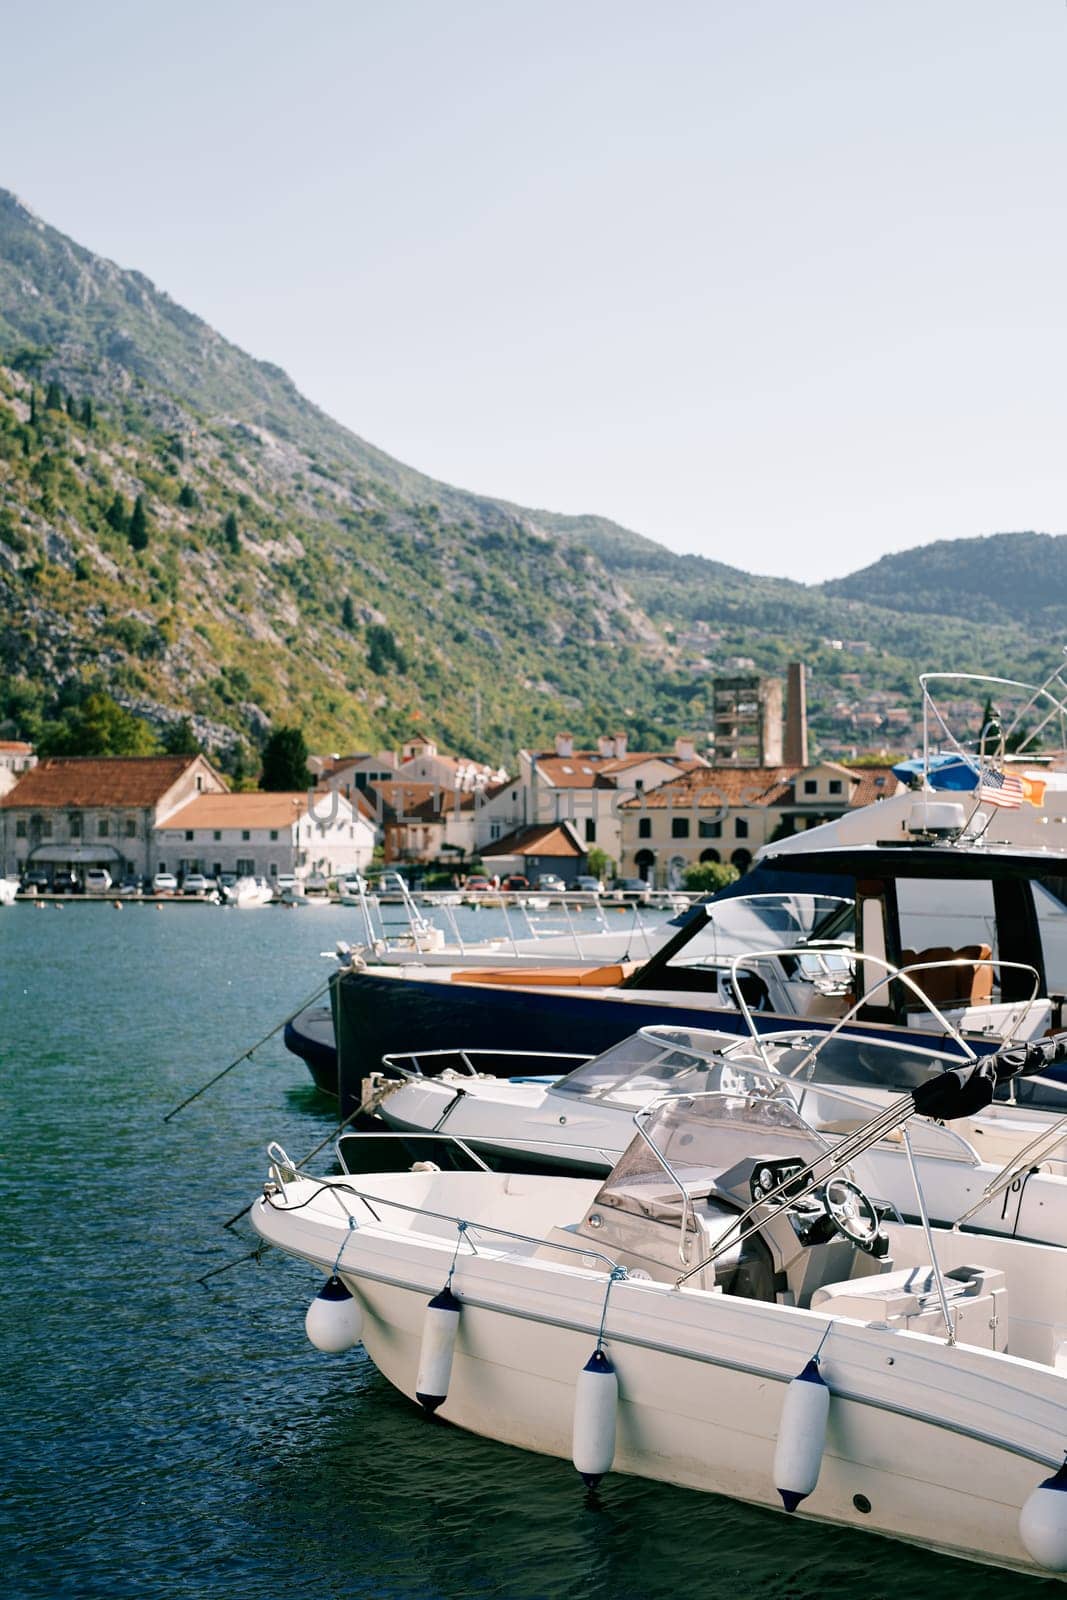 Motorboats are moored along the shore overlooking ancient houses at the foot of the mountains. Kotor, Montenegro by Nadtochiy